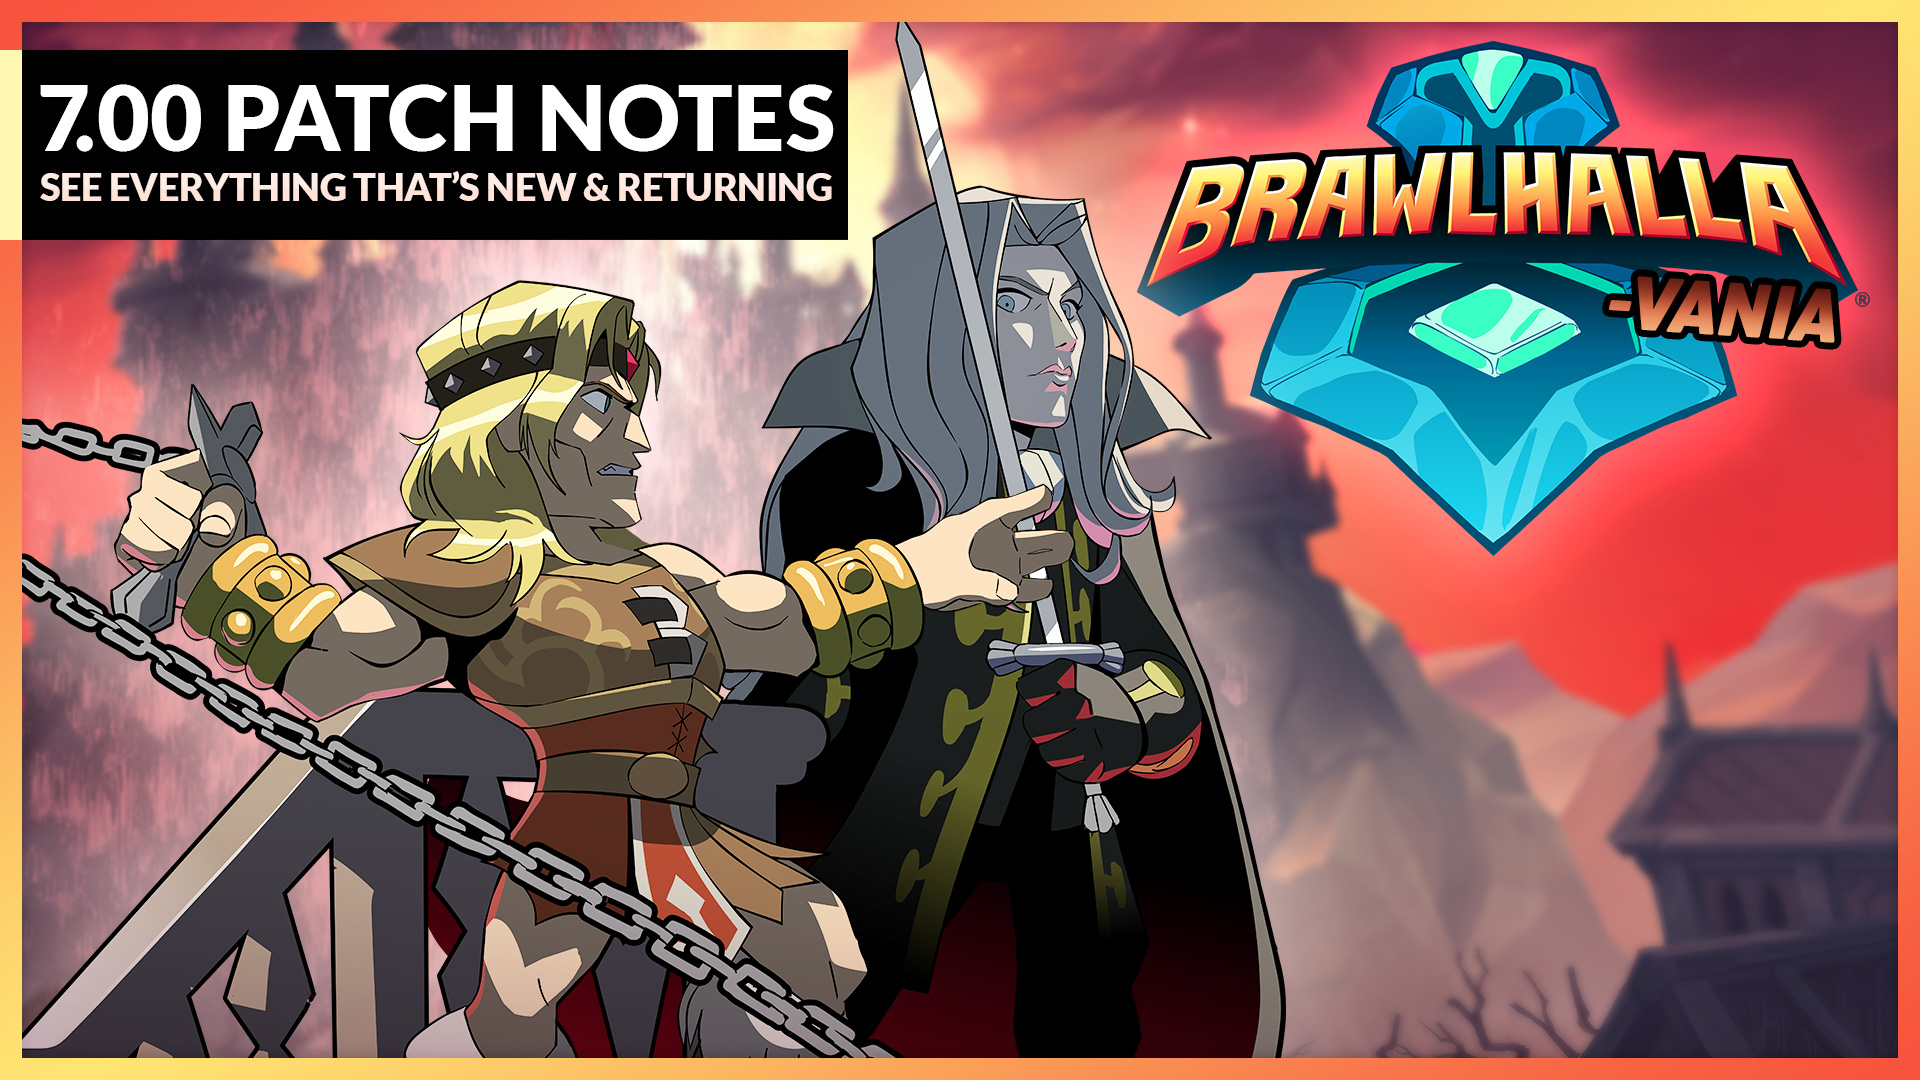 Enter Dracula’s Castle in Brawlhalla-vania! – Patch 7.00